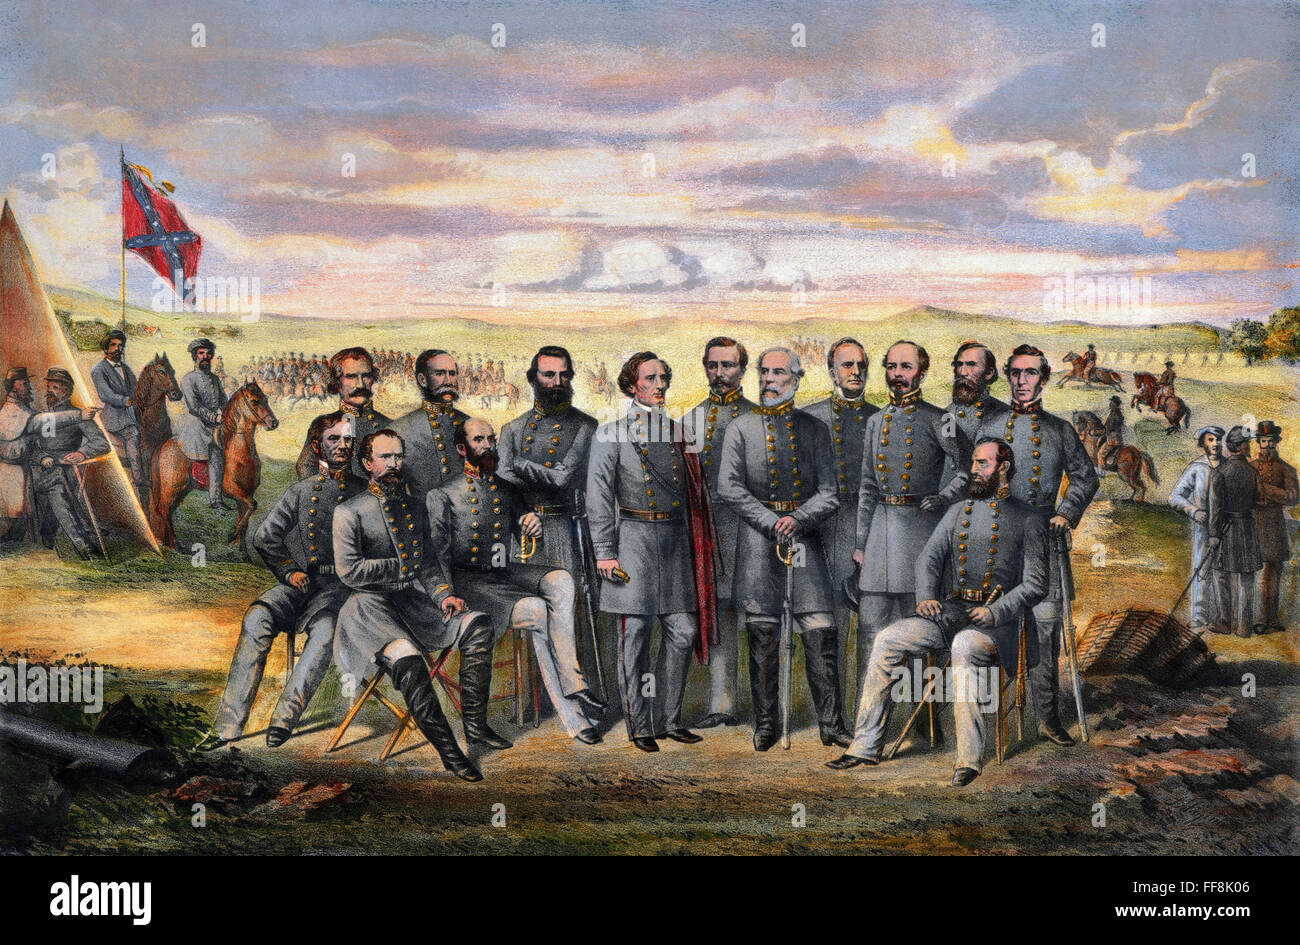 CONFEDERATE GENERALS. /nThe Generals of the Confederate Army. Jefferson Davis, with red cloak, is at center left; Robert E. Lee, standing with saber, is at center right. Contemporary American lithograph. Stock Photo